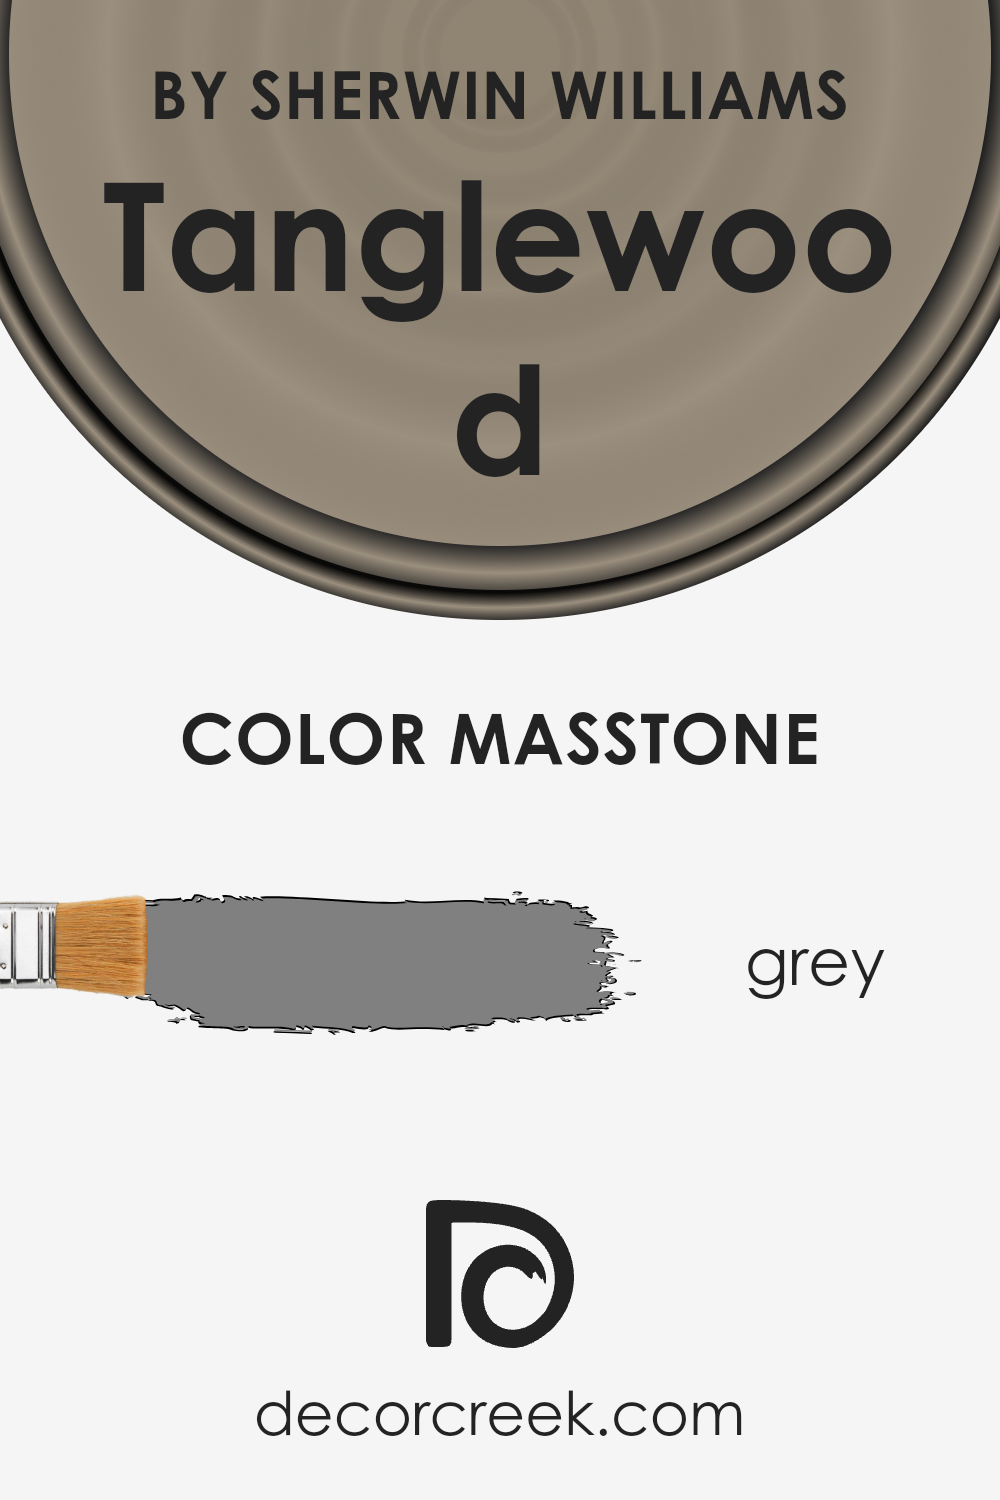 what_is_the_masstone_of_tanglewood_sw_9607